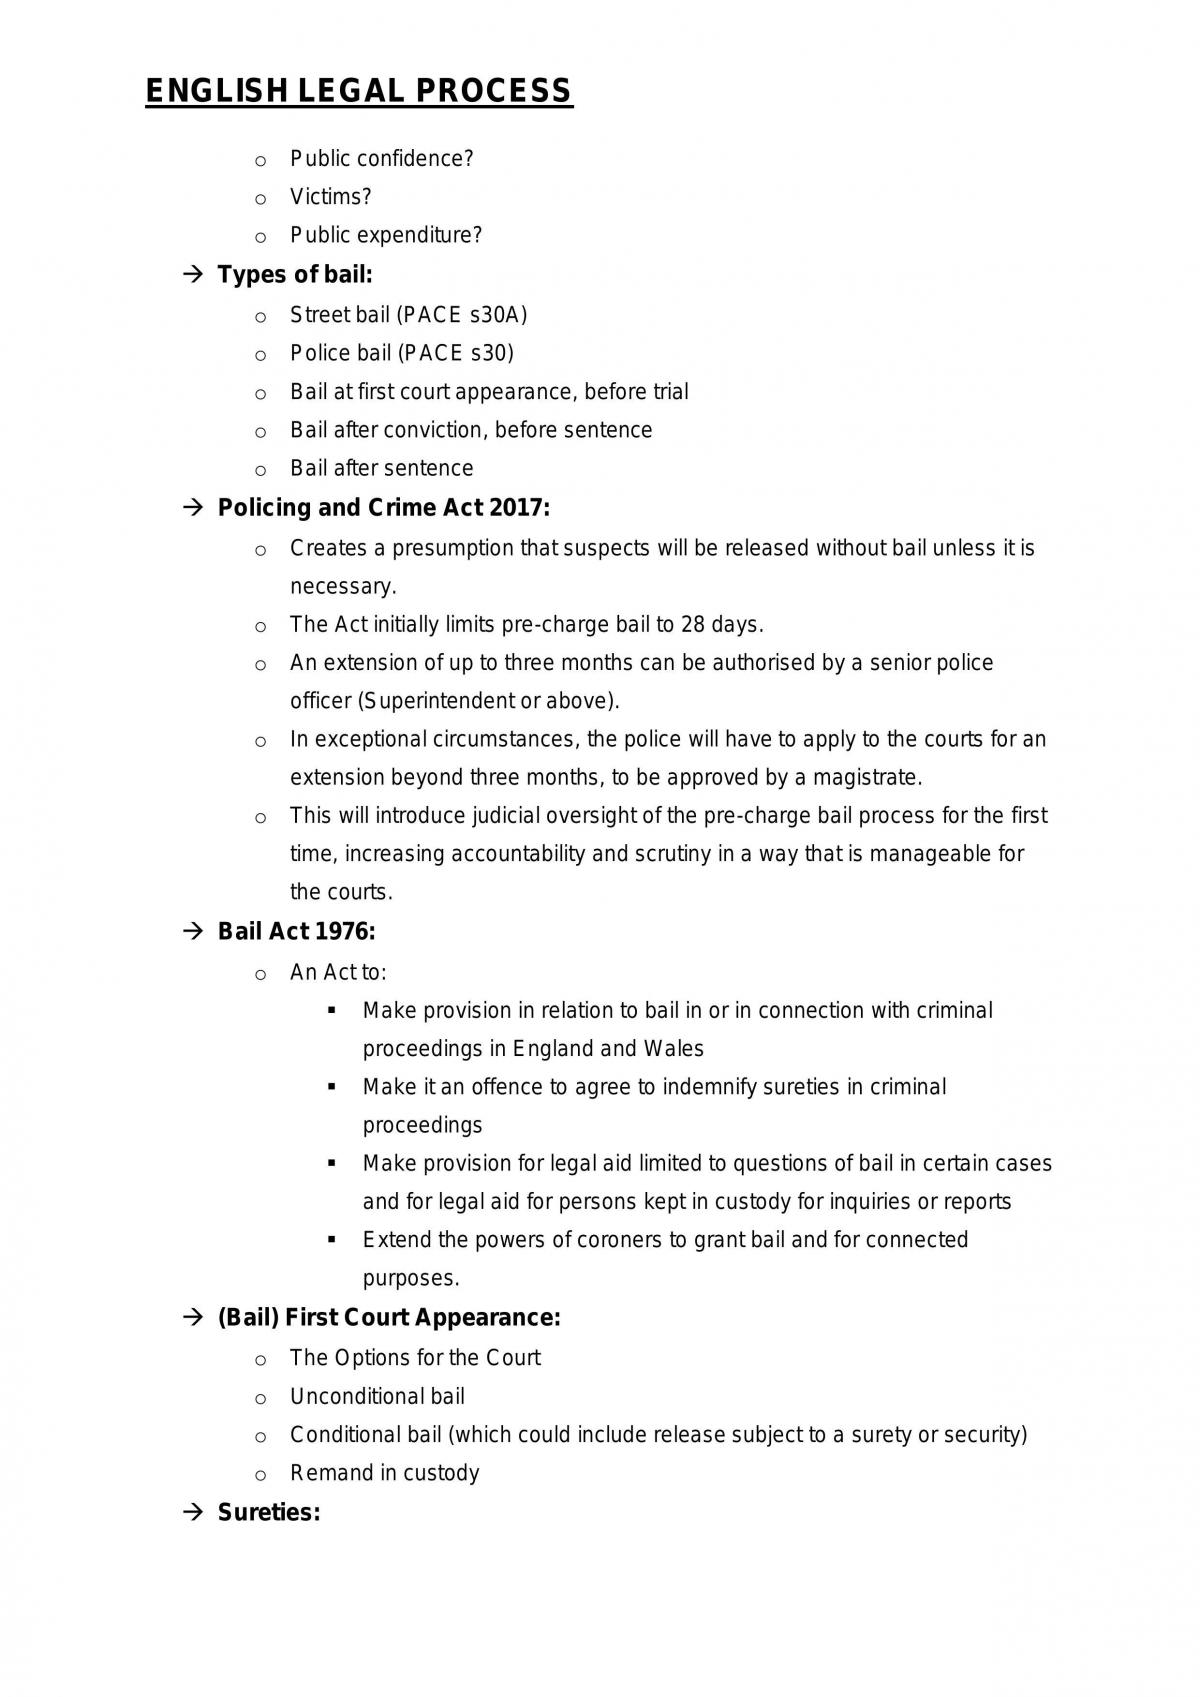 English Legal Process Module Notes - Page 24